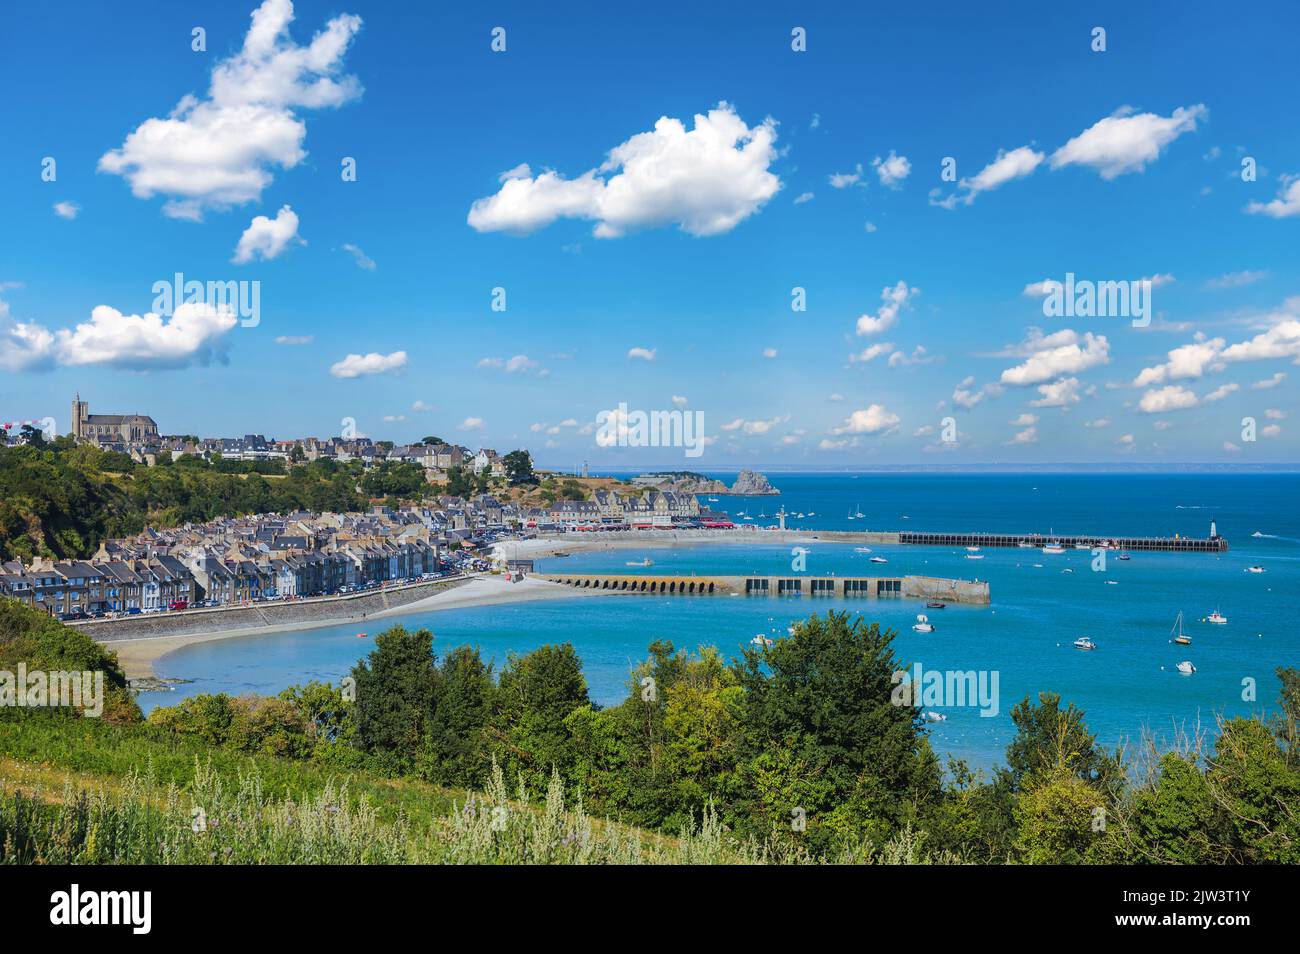 Panoramic view of Cancale, located on the coast of the Atlantic Ocean on the Baie du Mont Saint Michel, Brittany, France Stock Photo